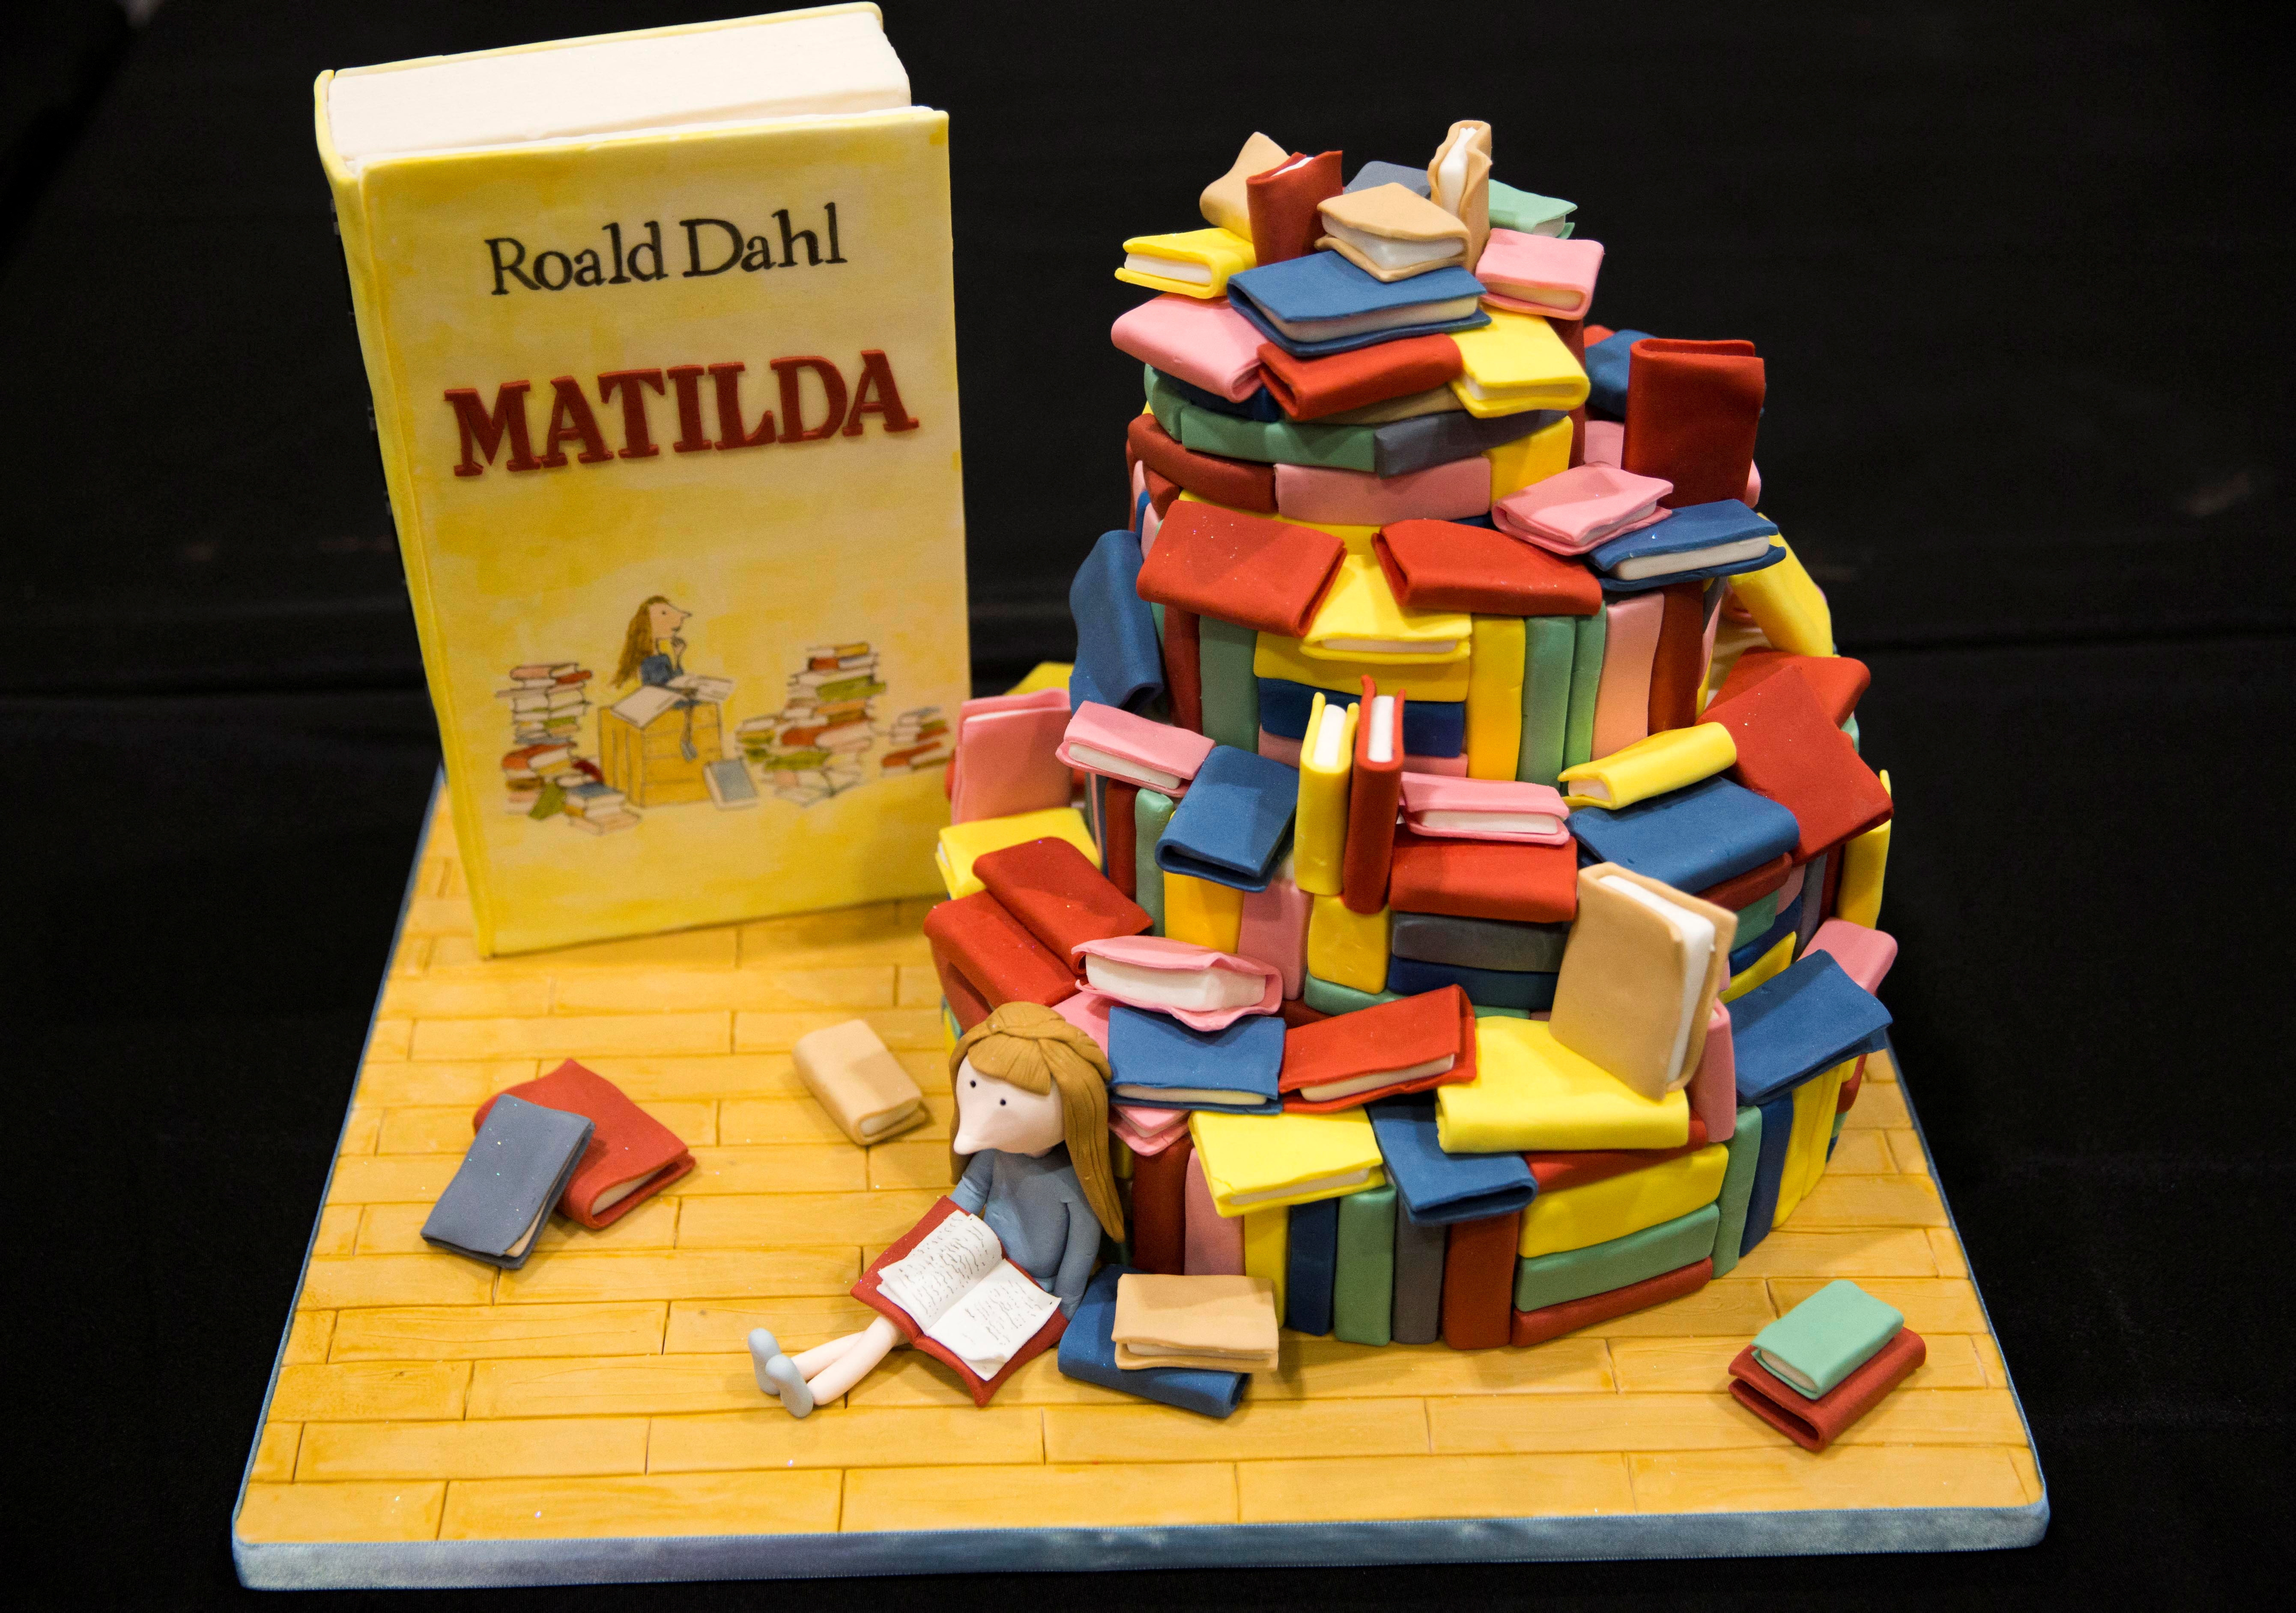 A cake decorated in the style of the Roald Dahl children's book 